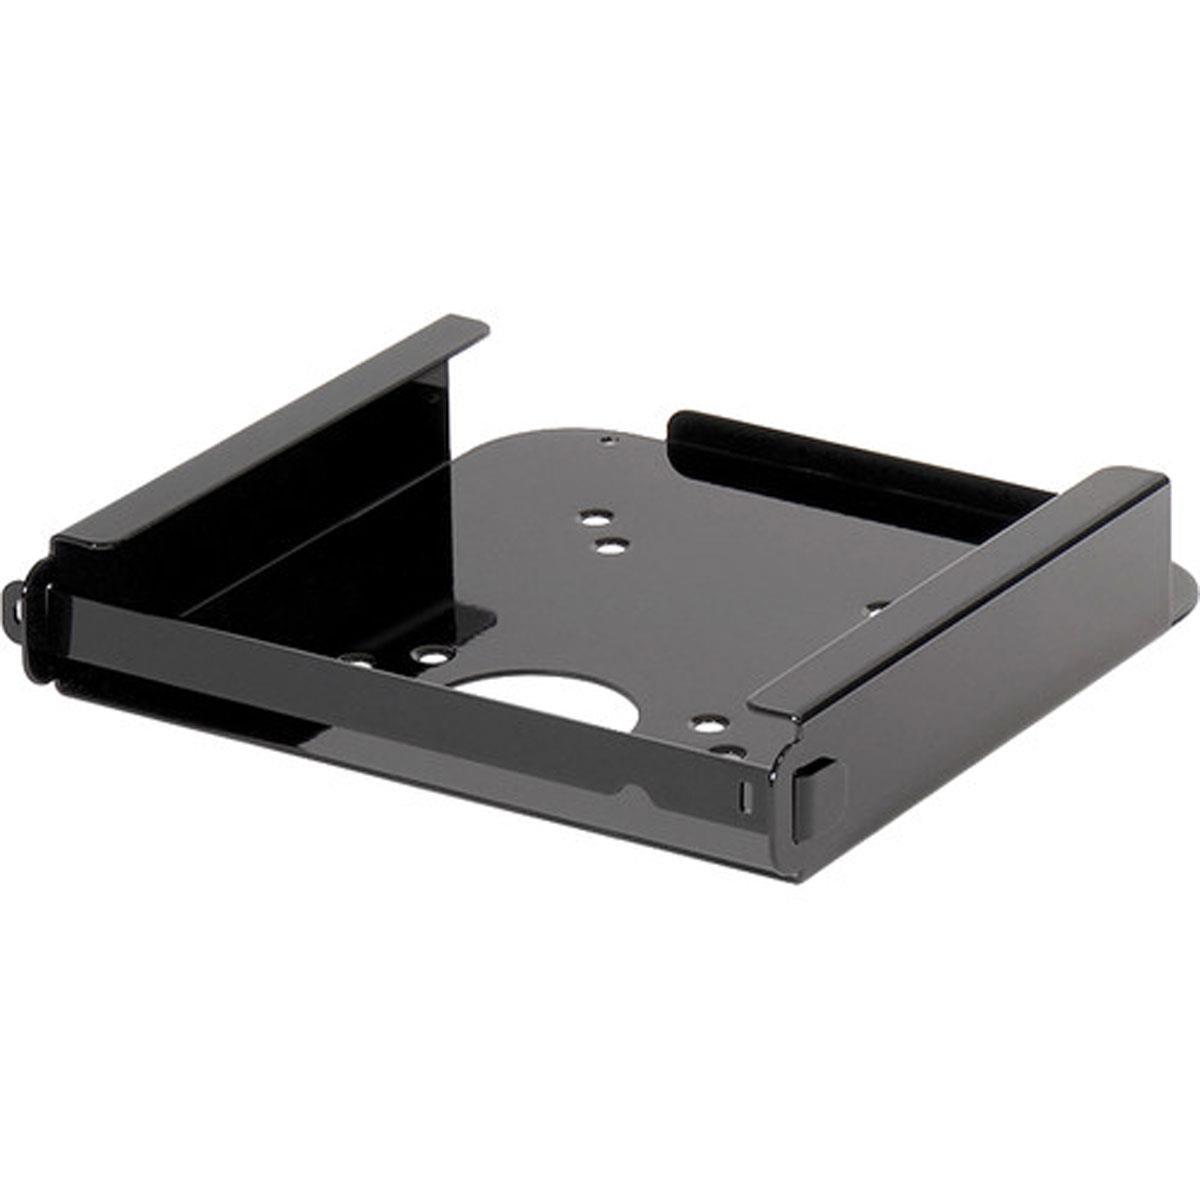 Photos - Other for Tablets Sonnet Technologies Sonnet MacCuff mini 2 Mounting Bracket for Mac mini CUFF-MIN-LH2 